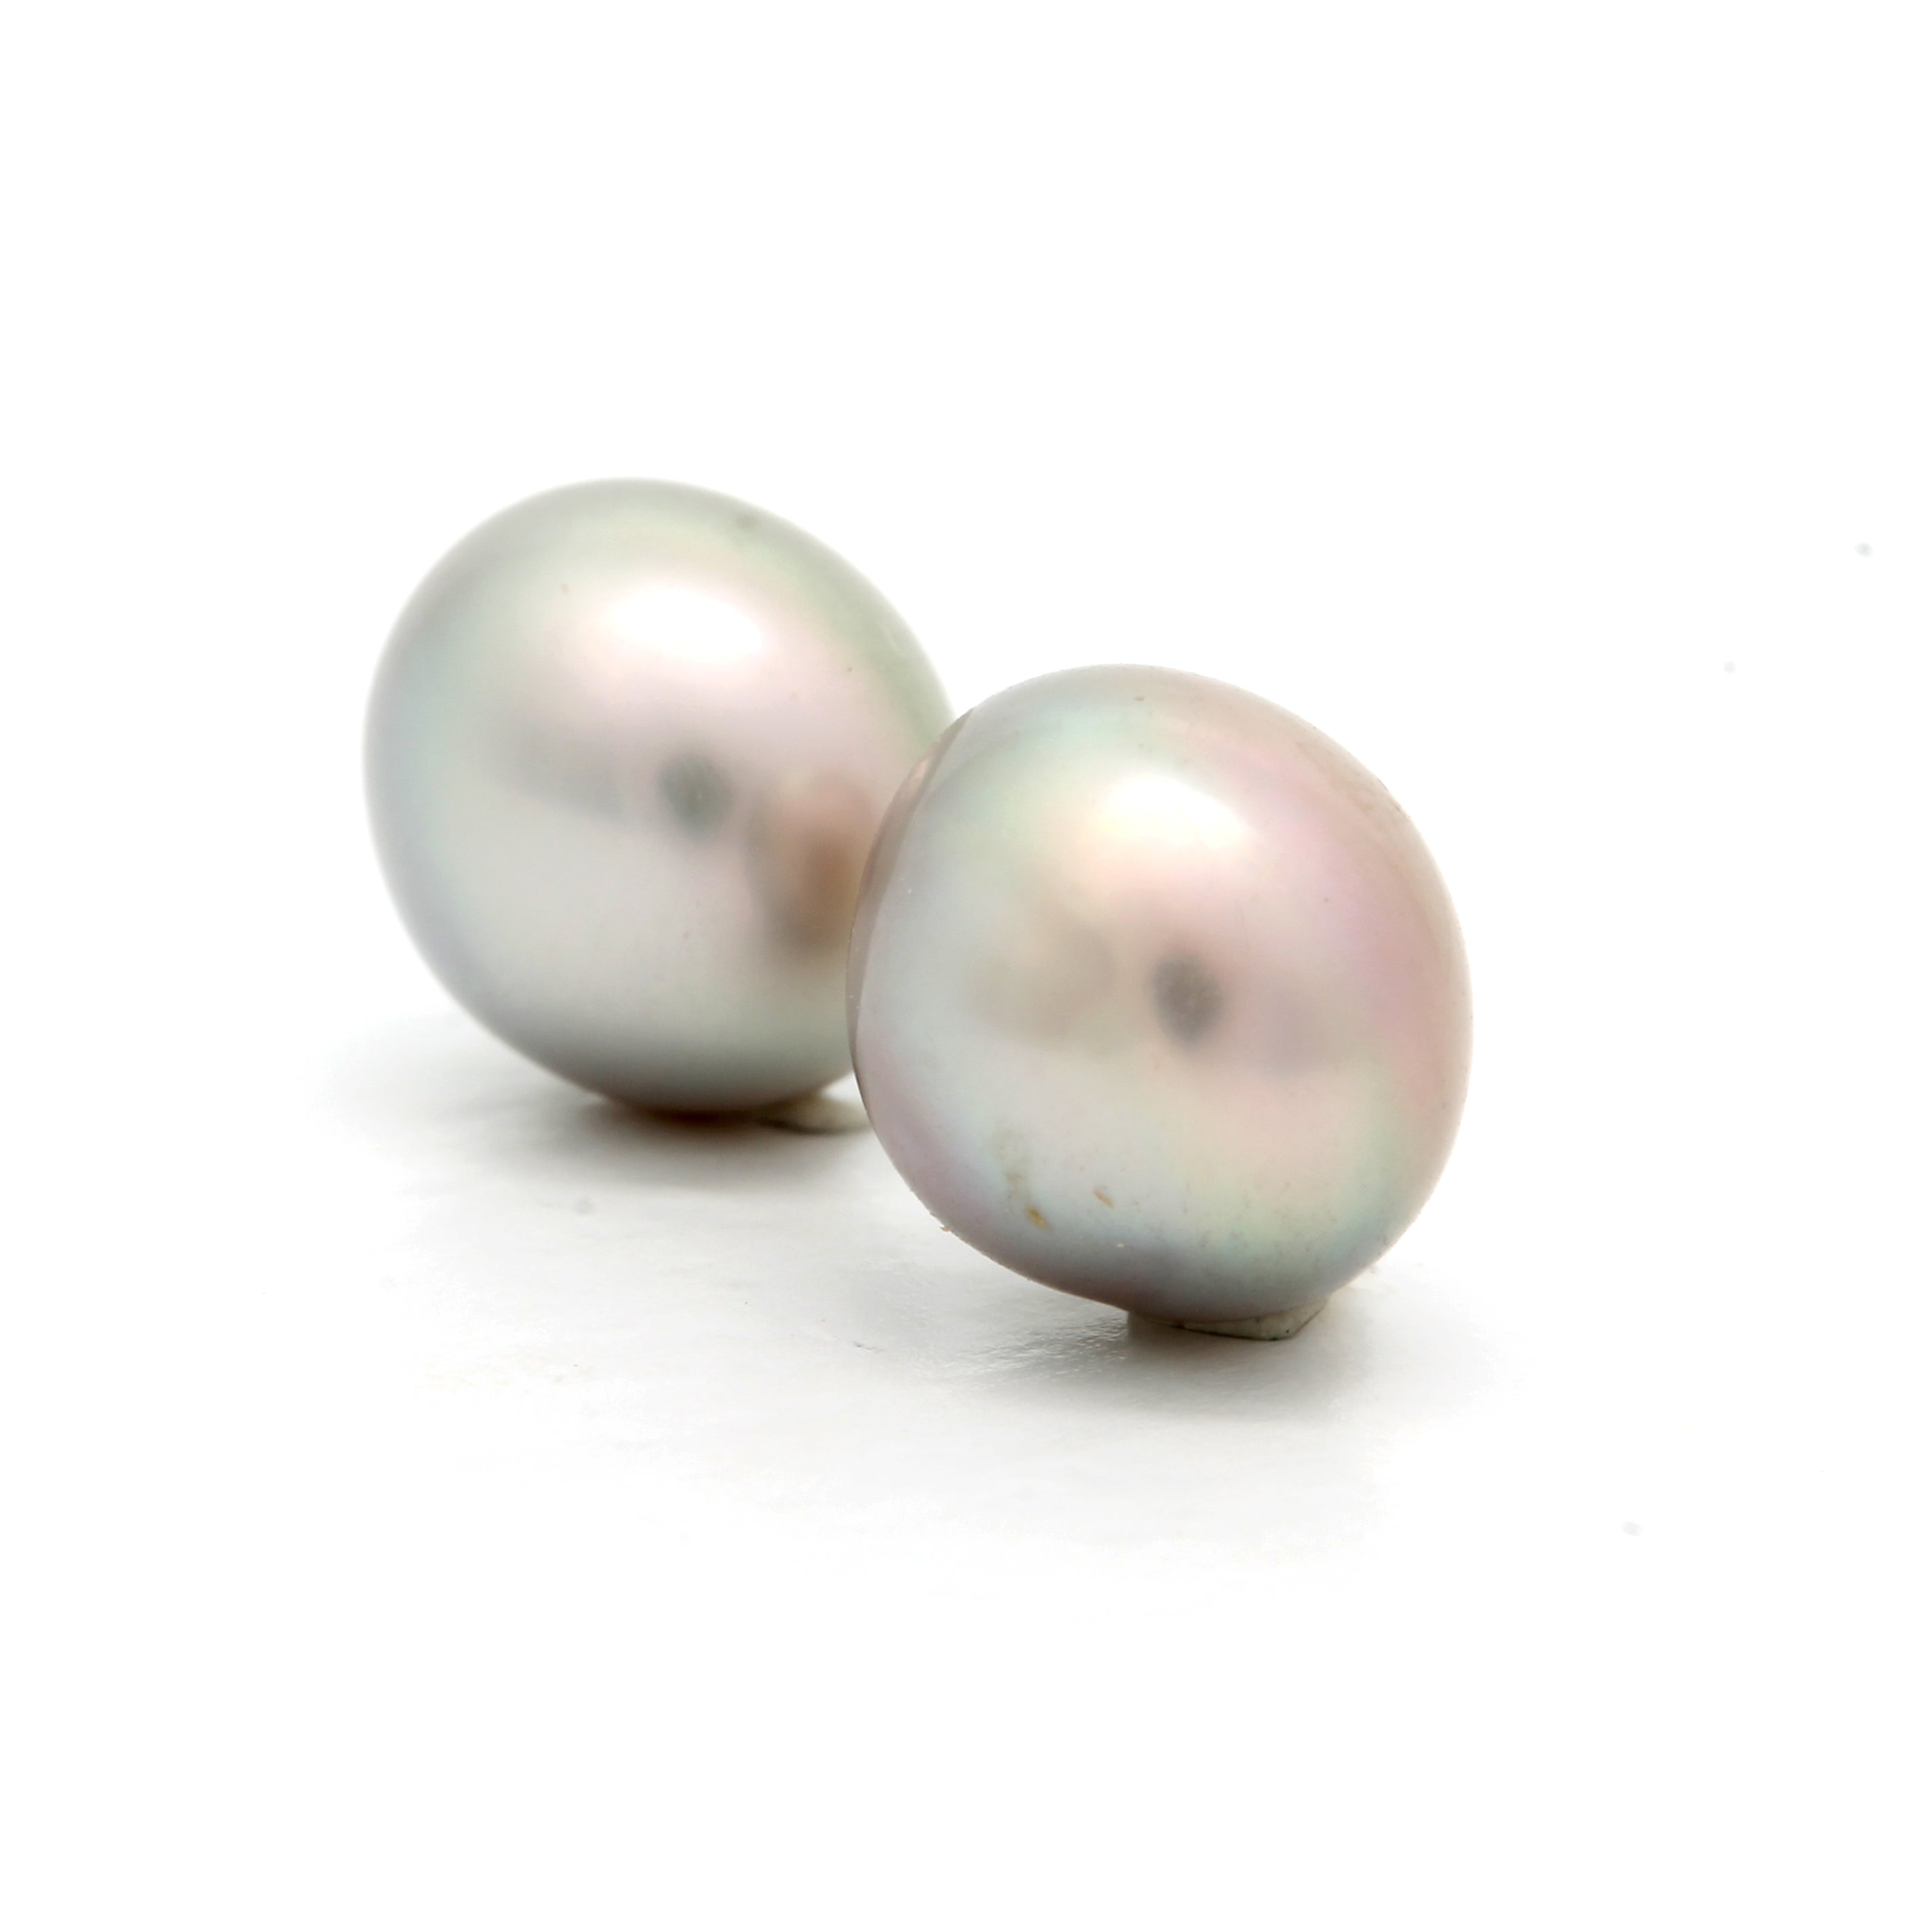 Pair of "Button" 9 mm Cortez Pearls